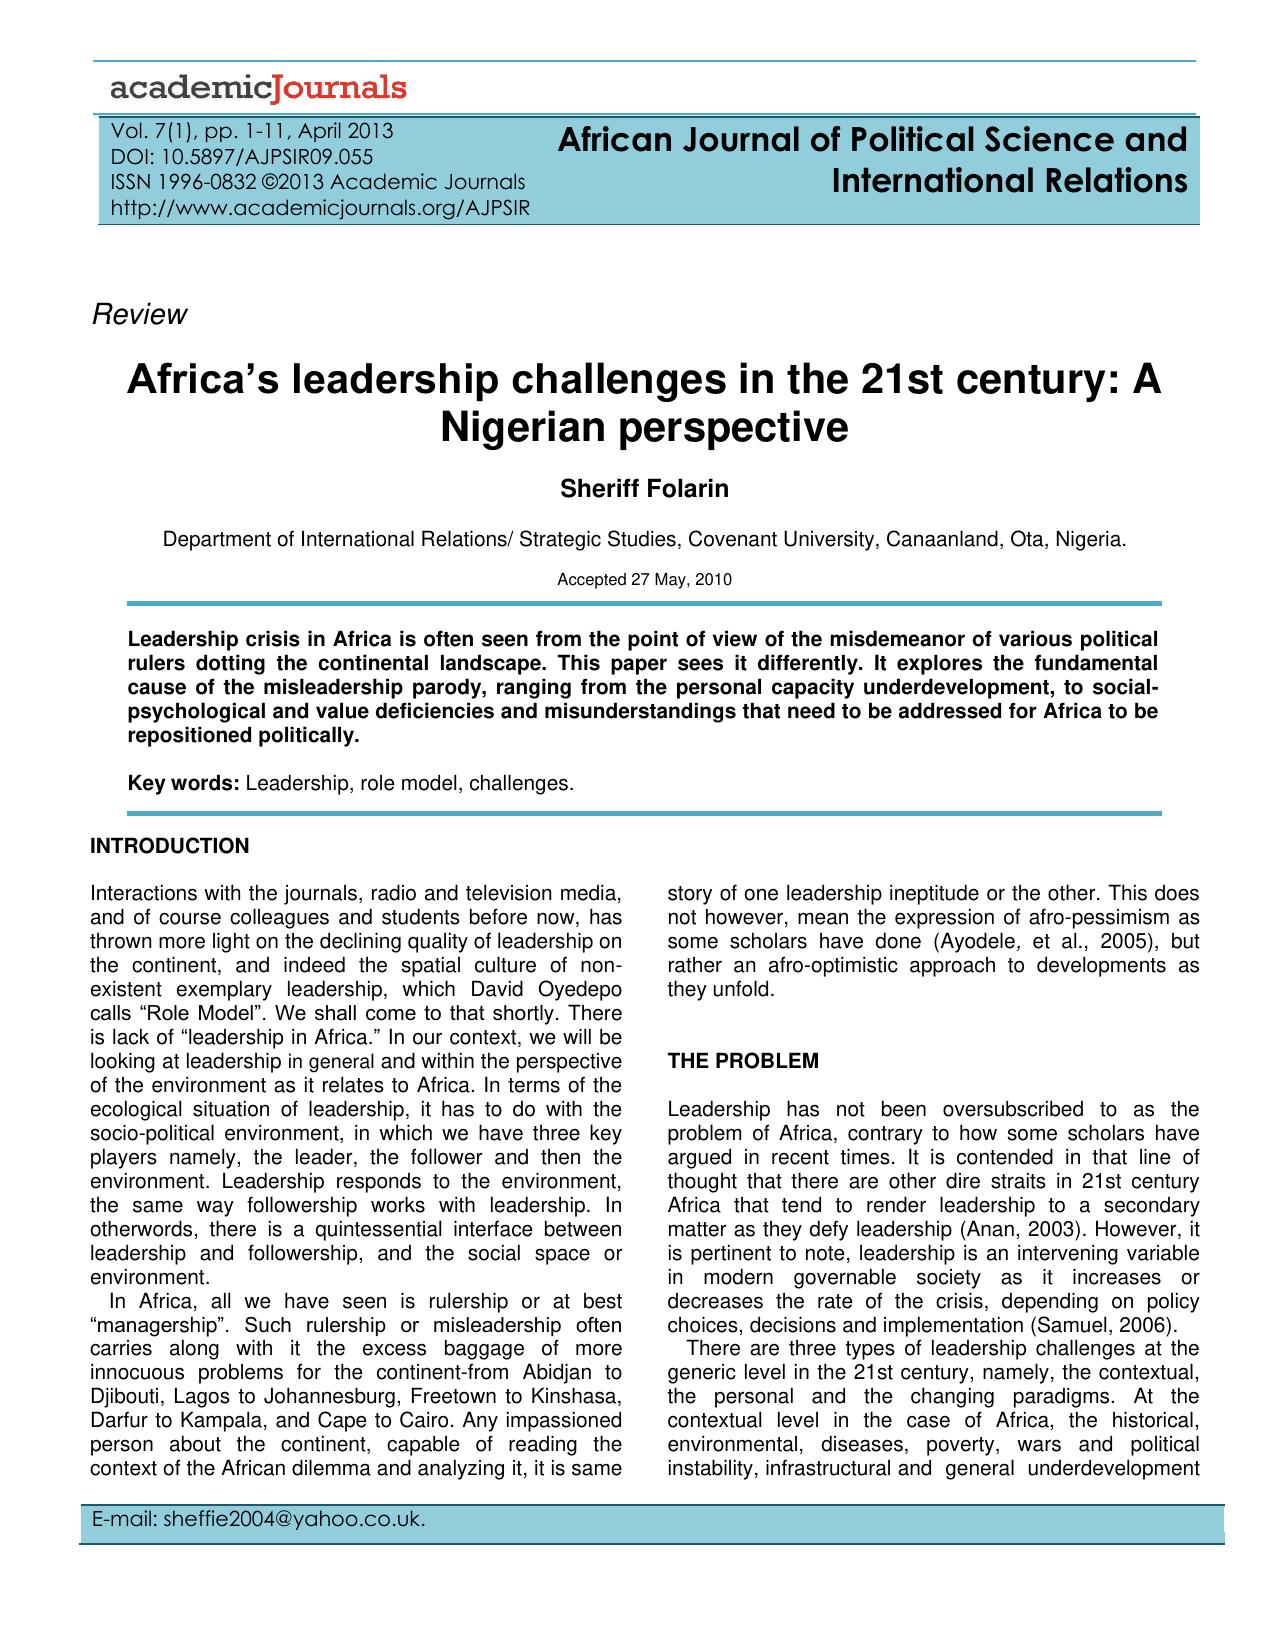 LEADERSHIP CHALLENGES FOR AFRICA IN THE 21ST CENTURY: A NIGERIAN PERSPECTIVE*